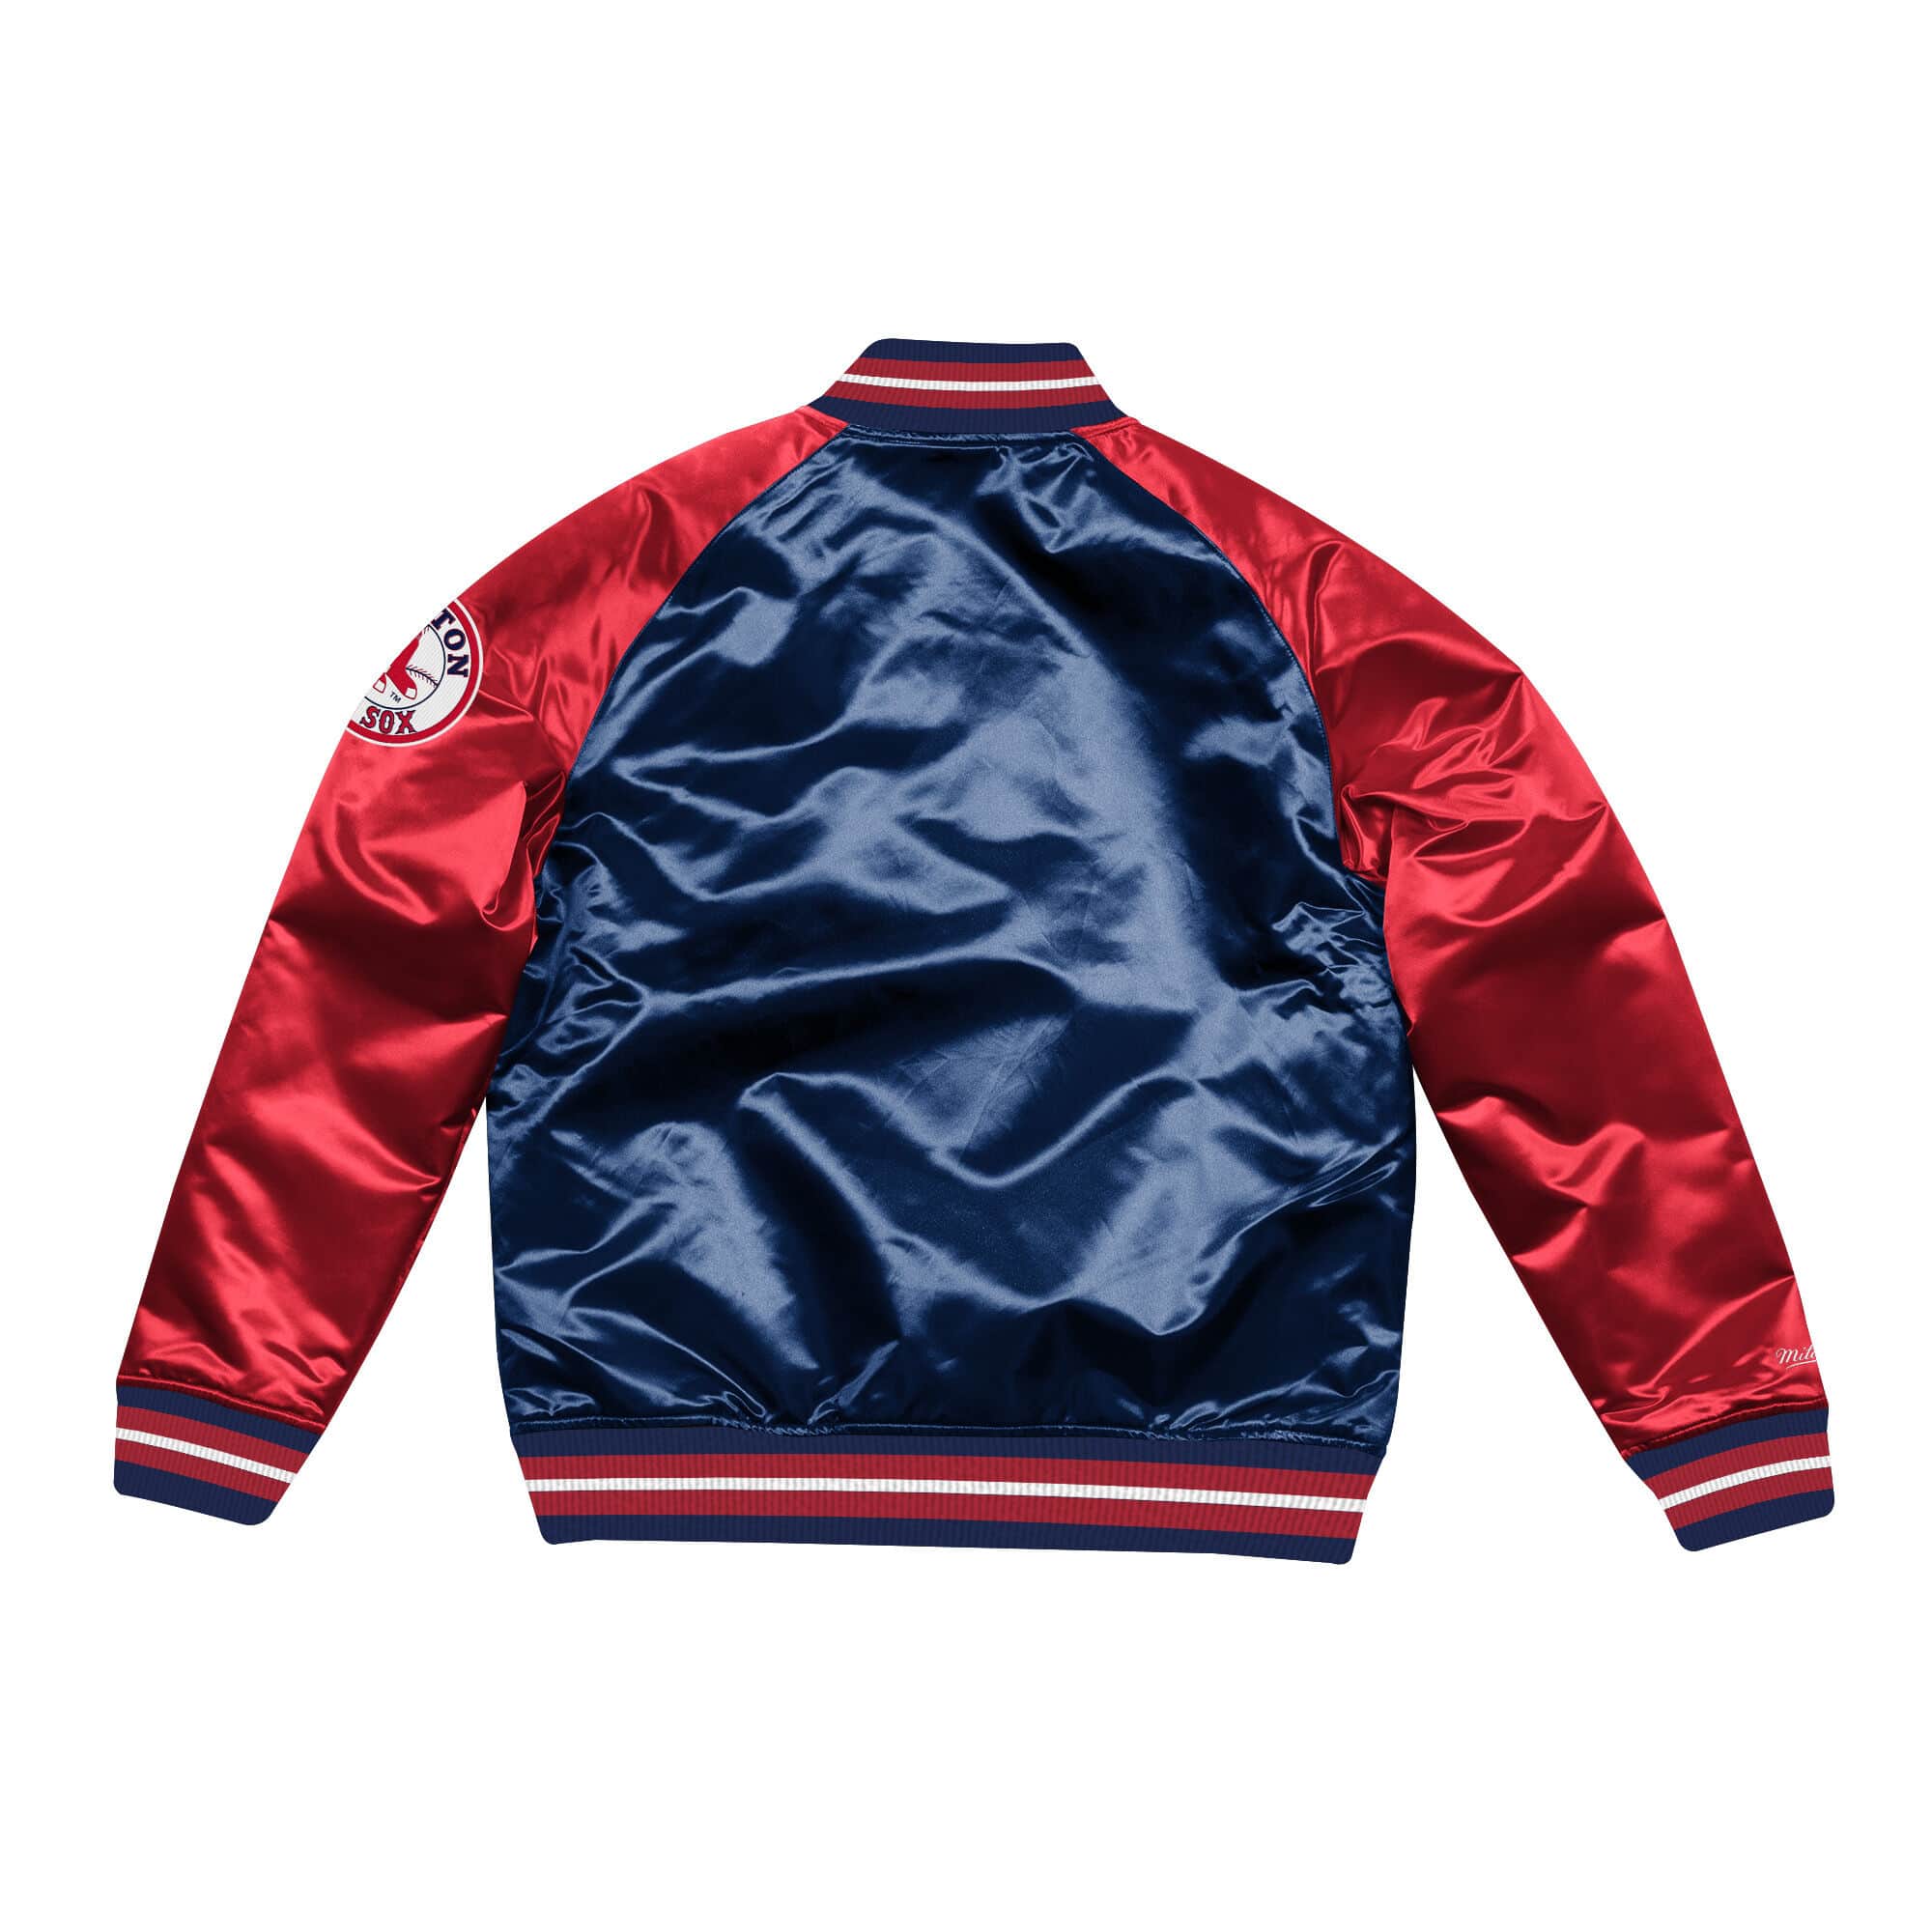 Boston Red Sox Letterman Red and Blue Jacket